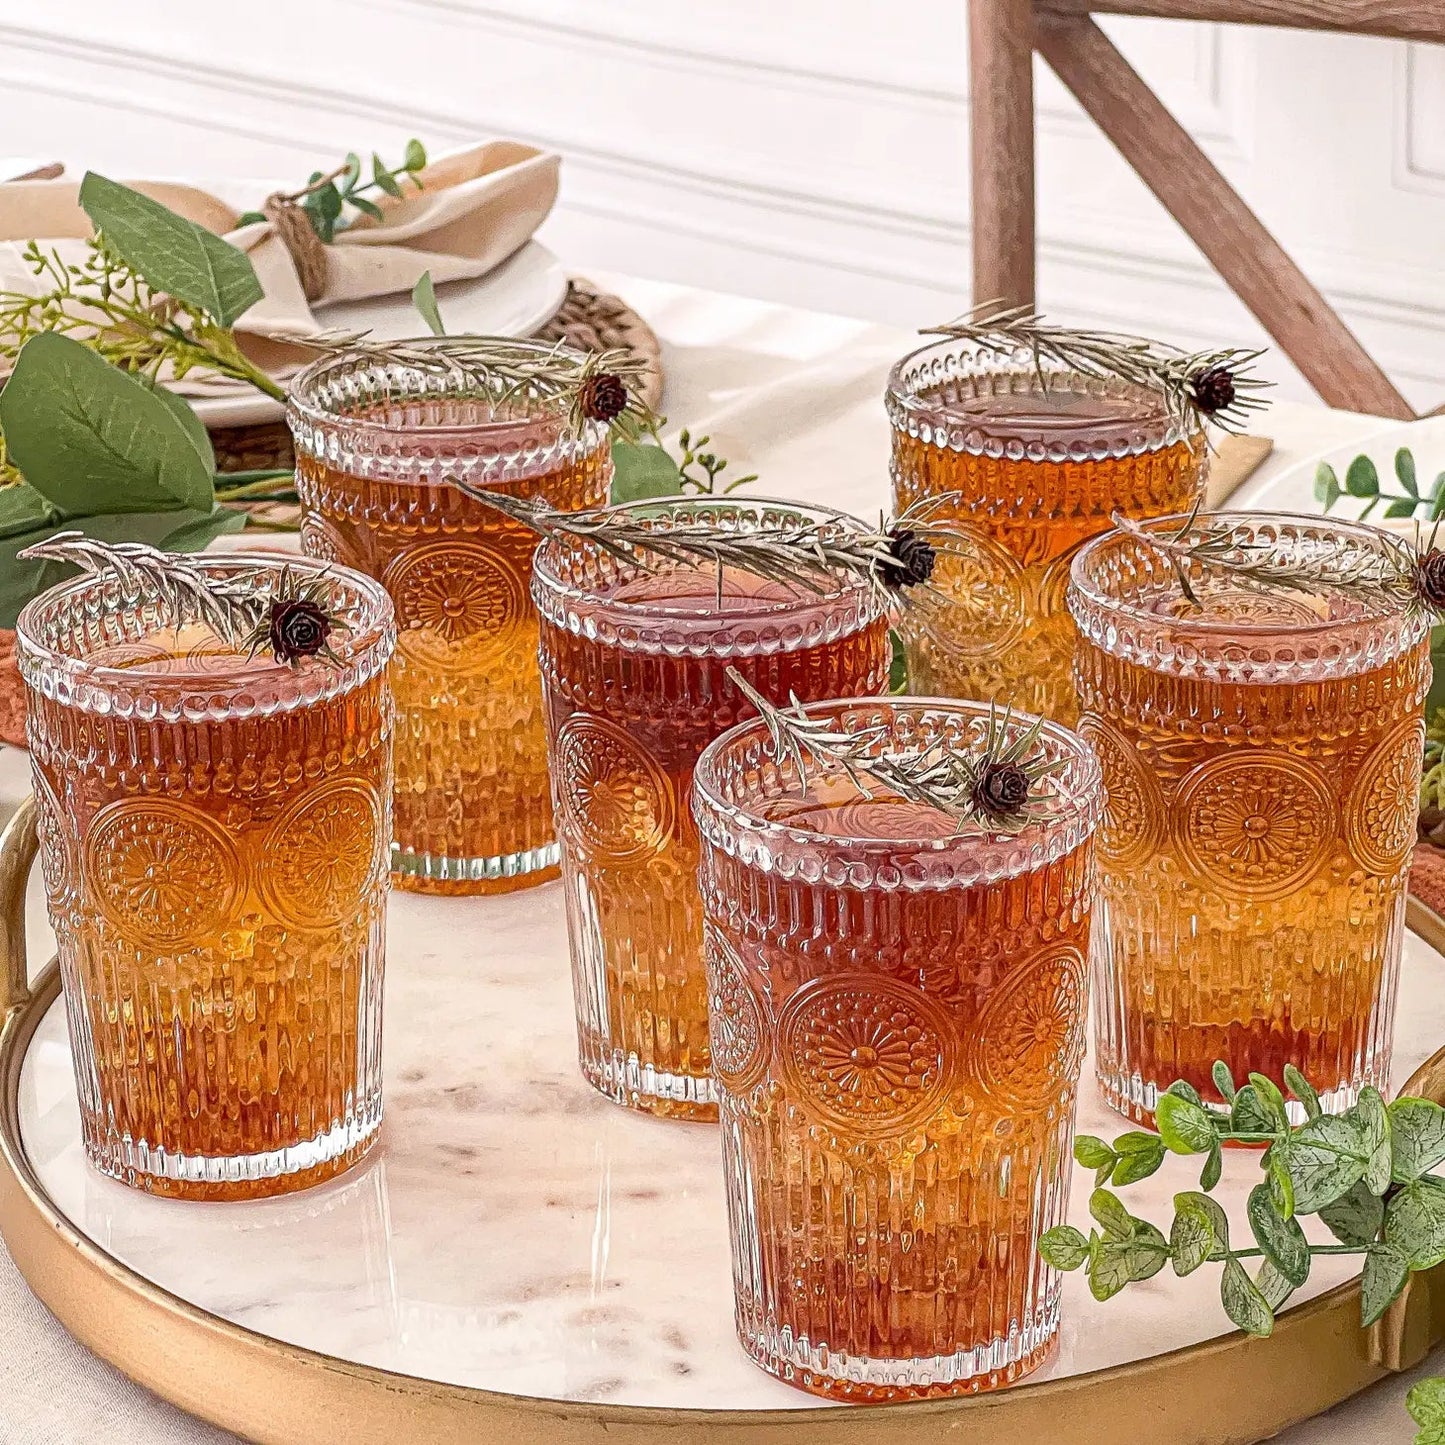 13 oz. Vintage Textured Clear Drinking Glasses (6 Pcs) - Mindful Living Home